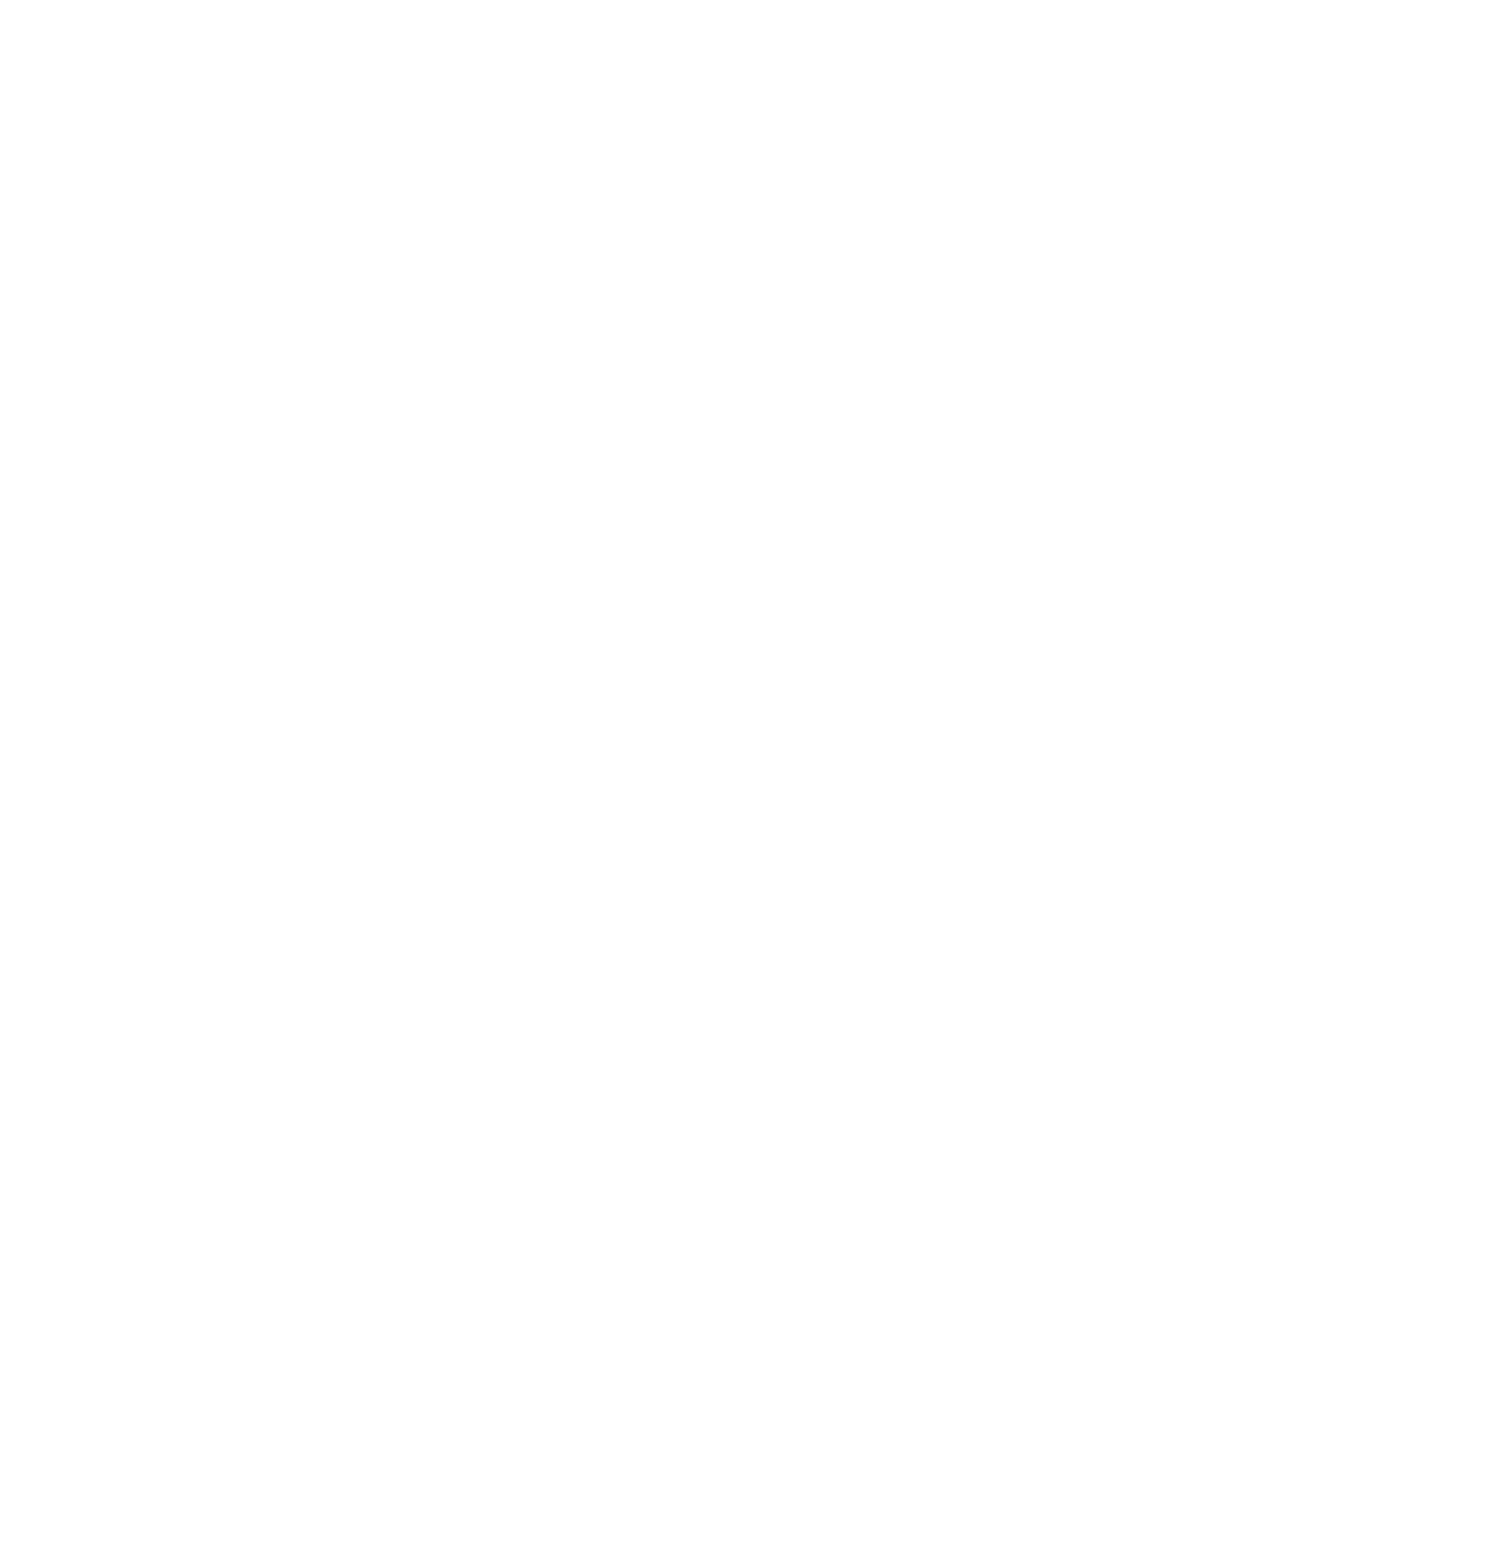 Grove Collaborative logo for dark backgrounds (transparent PNG)